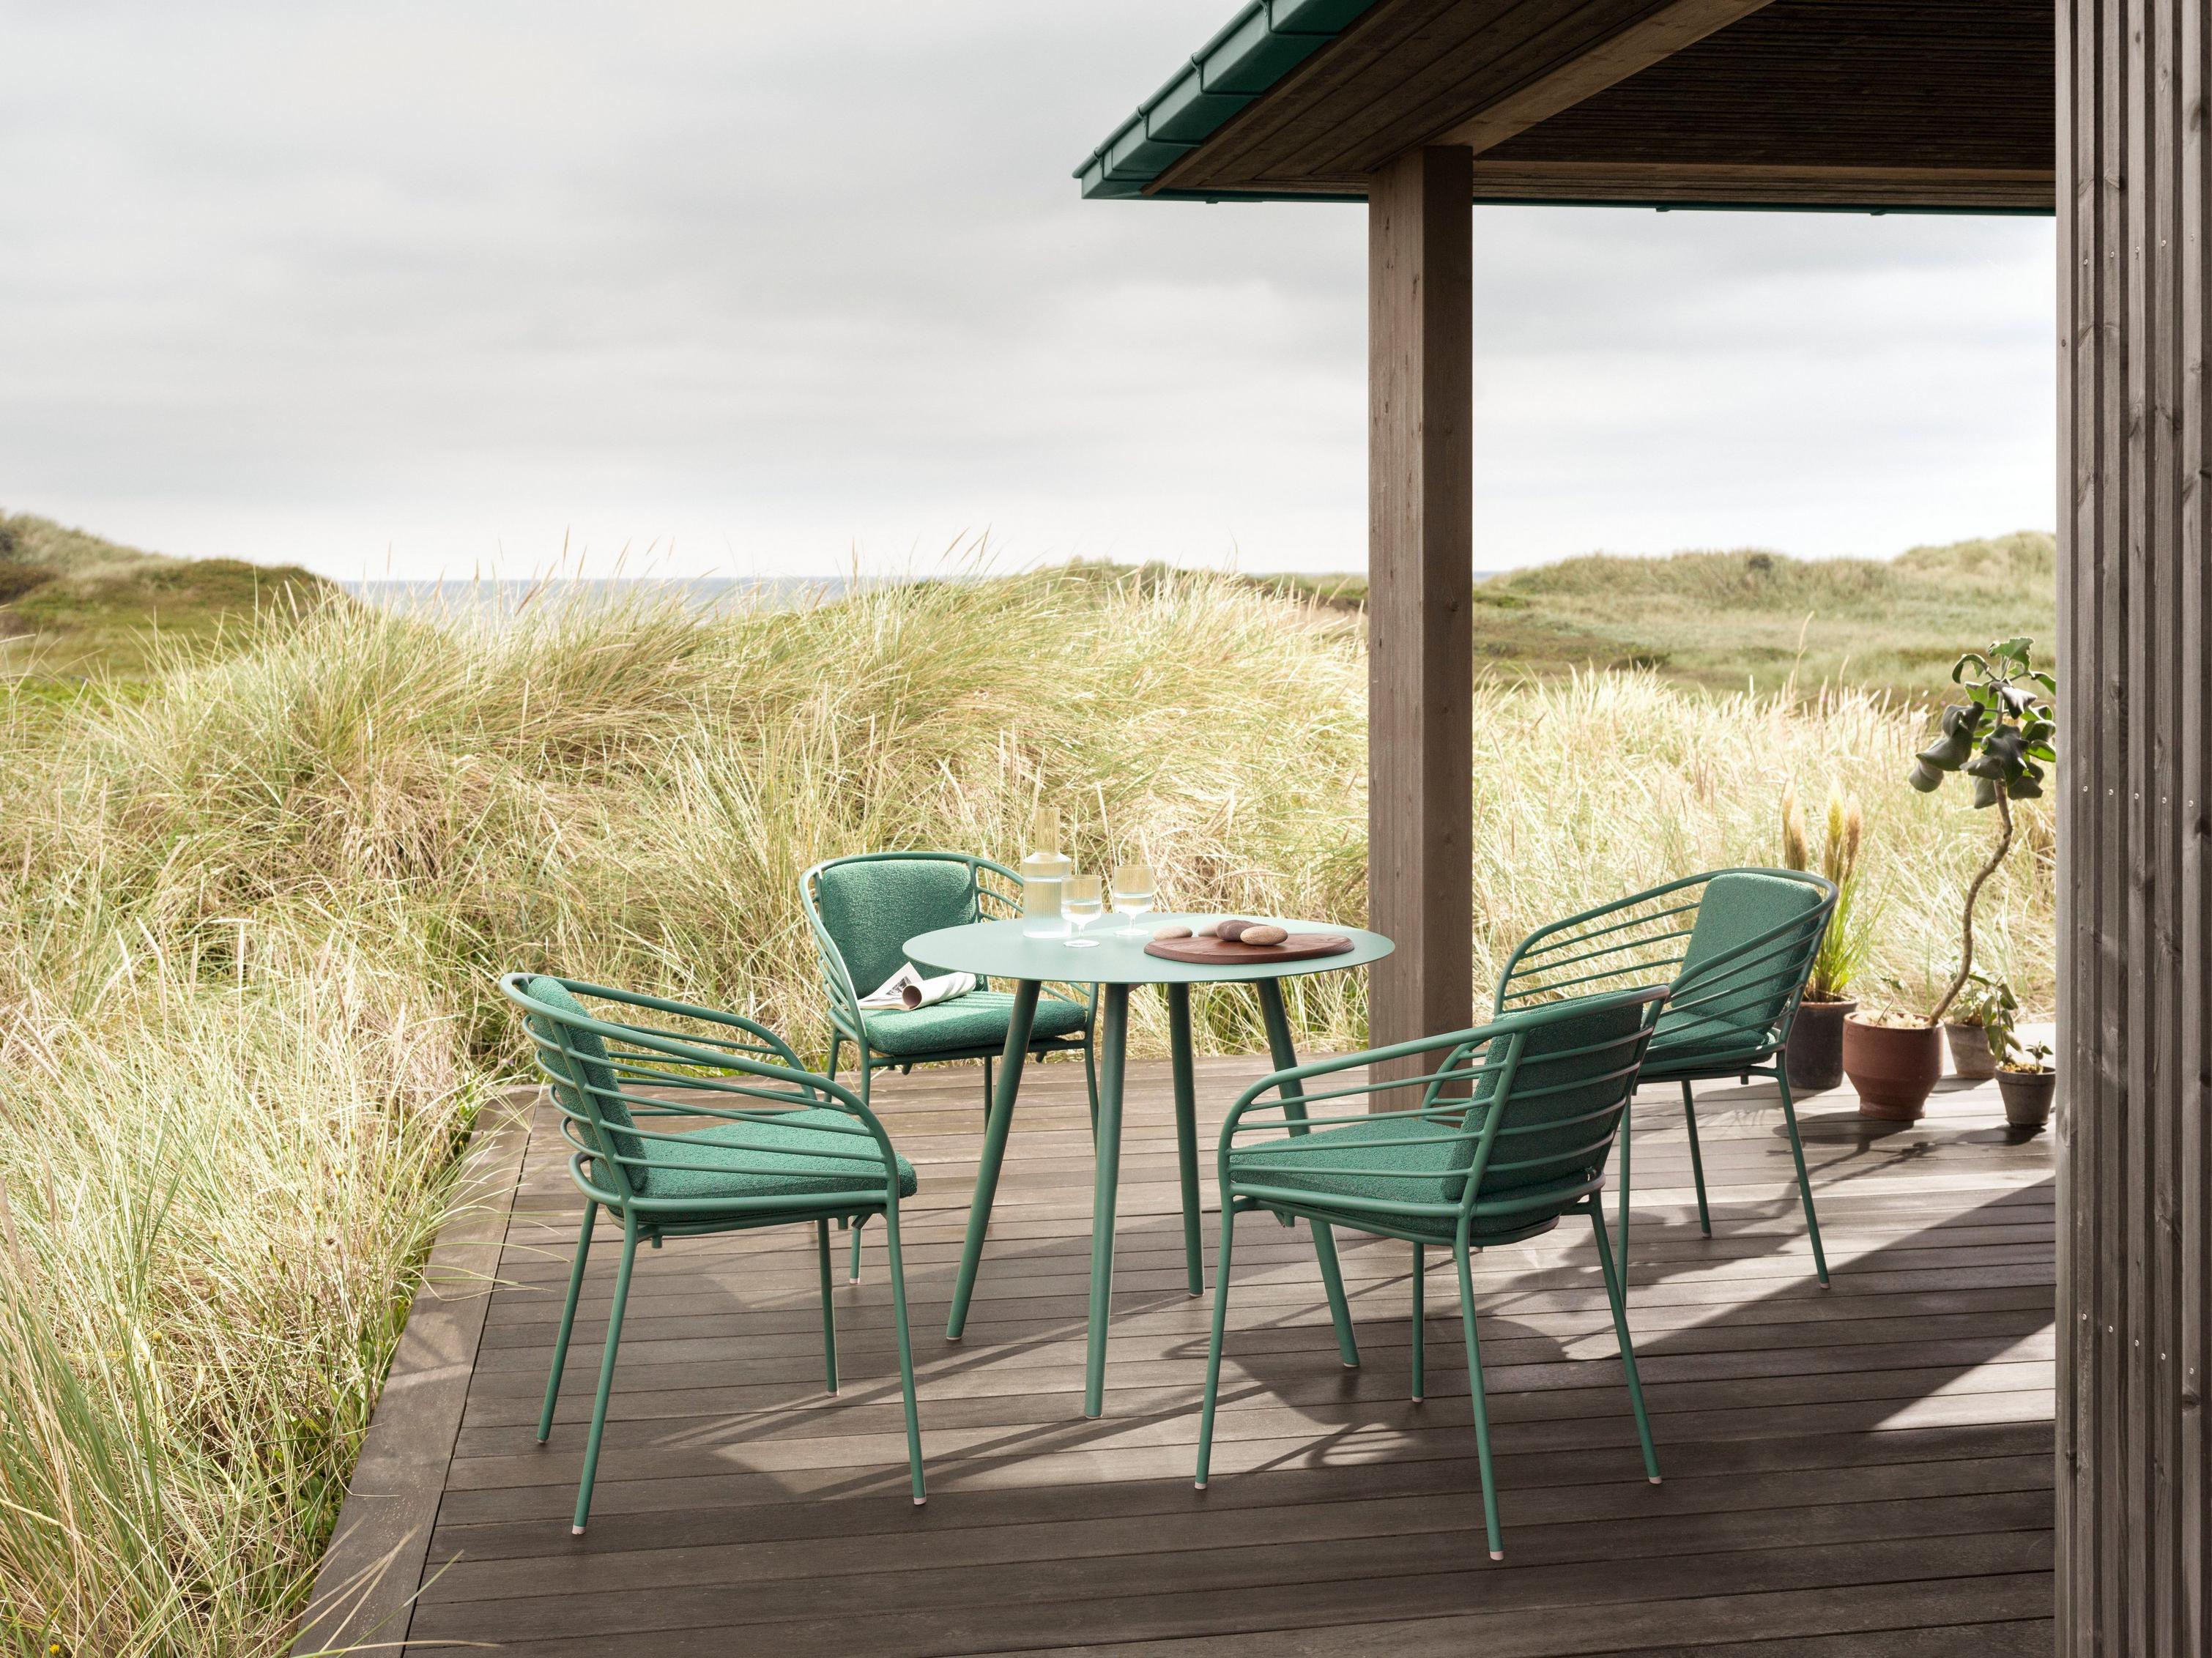 Elegant outdoor entertainment area featuring the Cancún Café table and dining chairs in matt green.